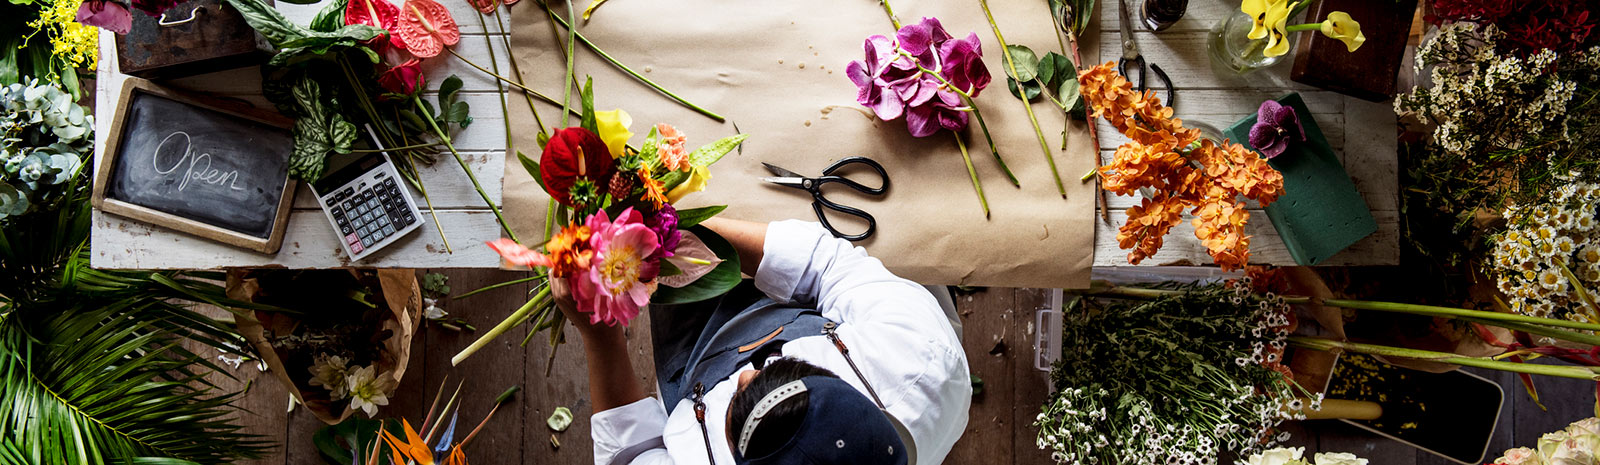 aerial shot of person arranging flowers